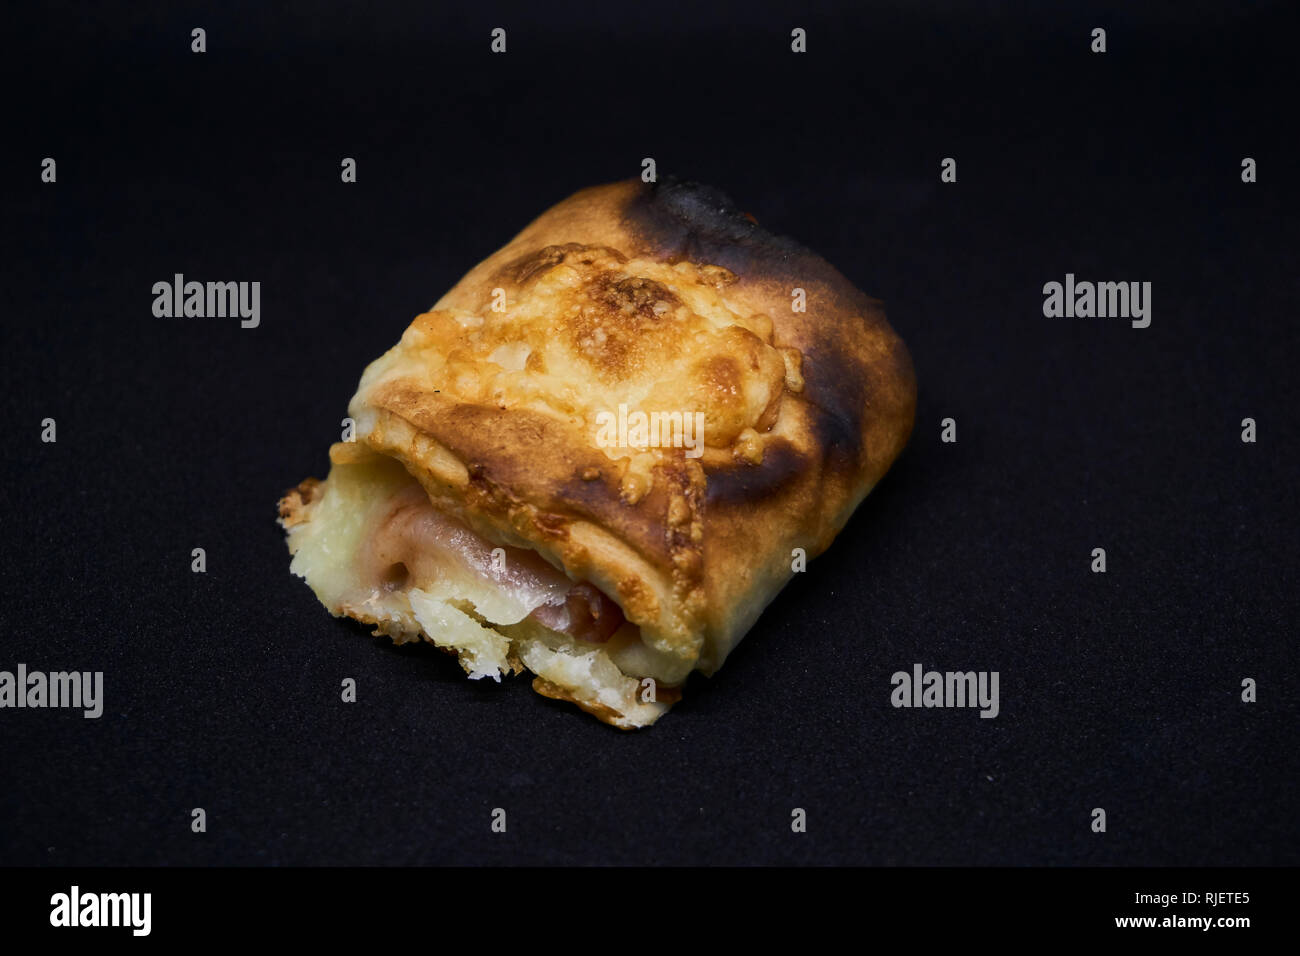 pizza bun looking nice with molten cheese Stock Photo